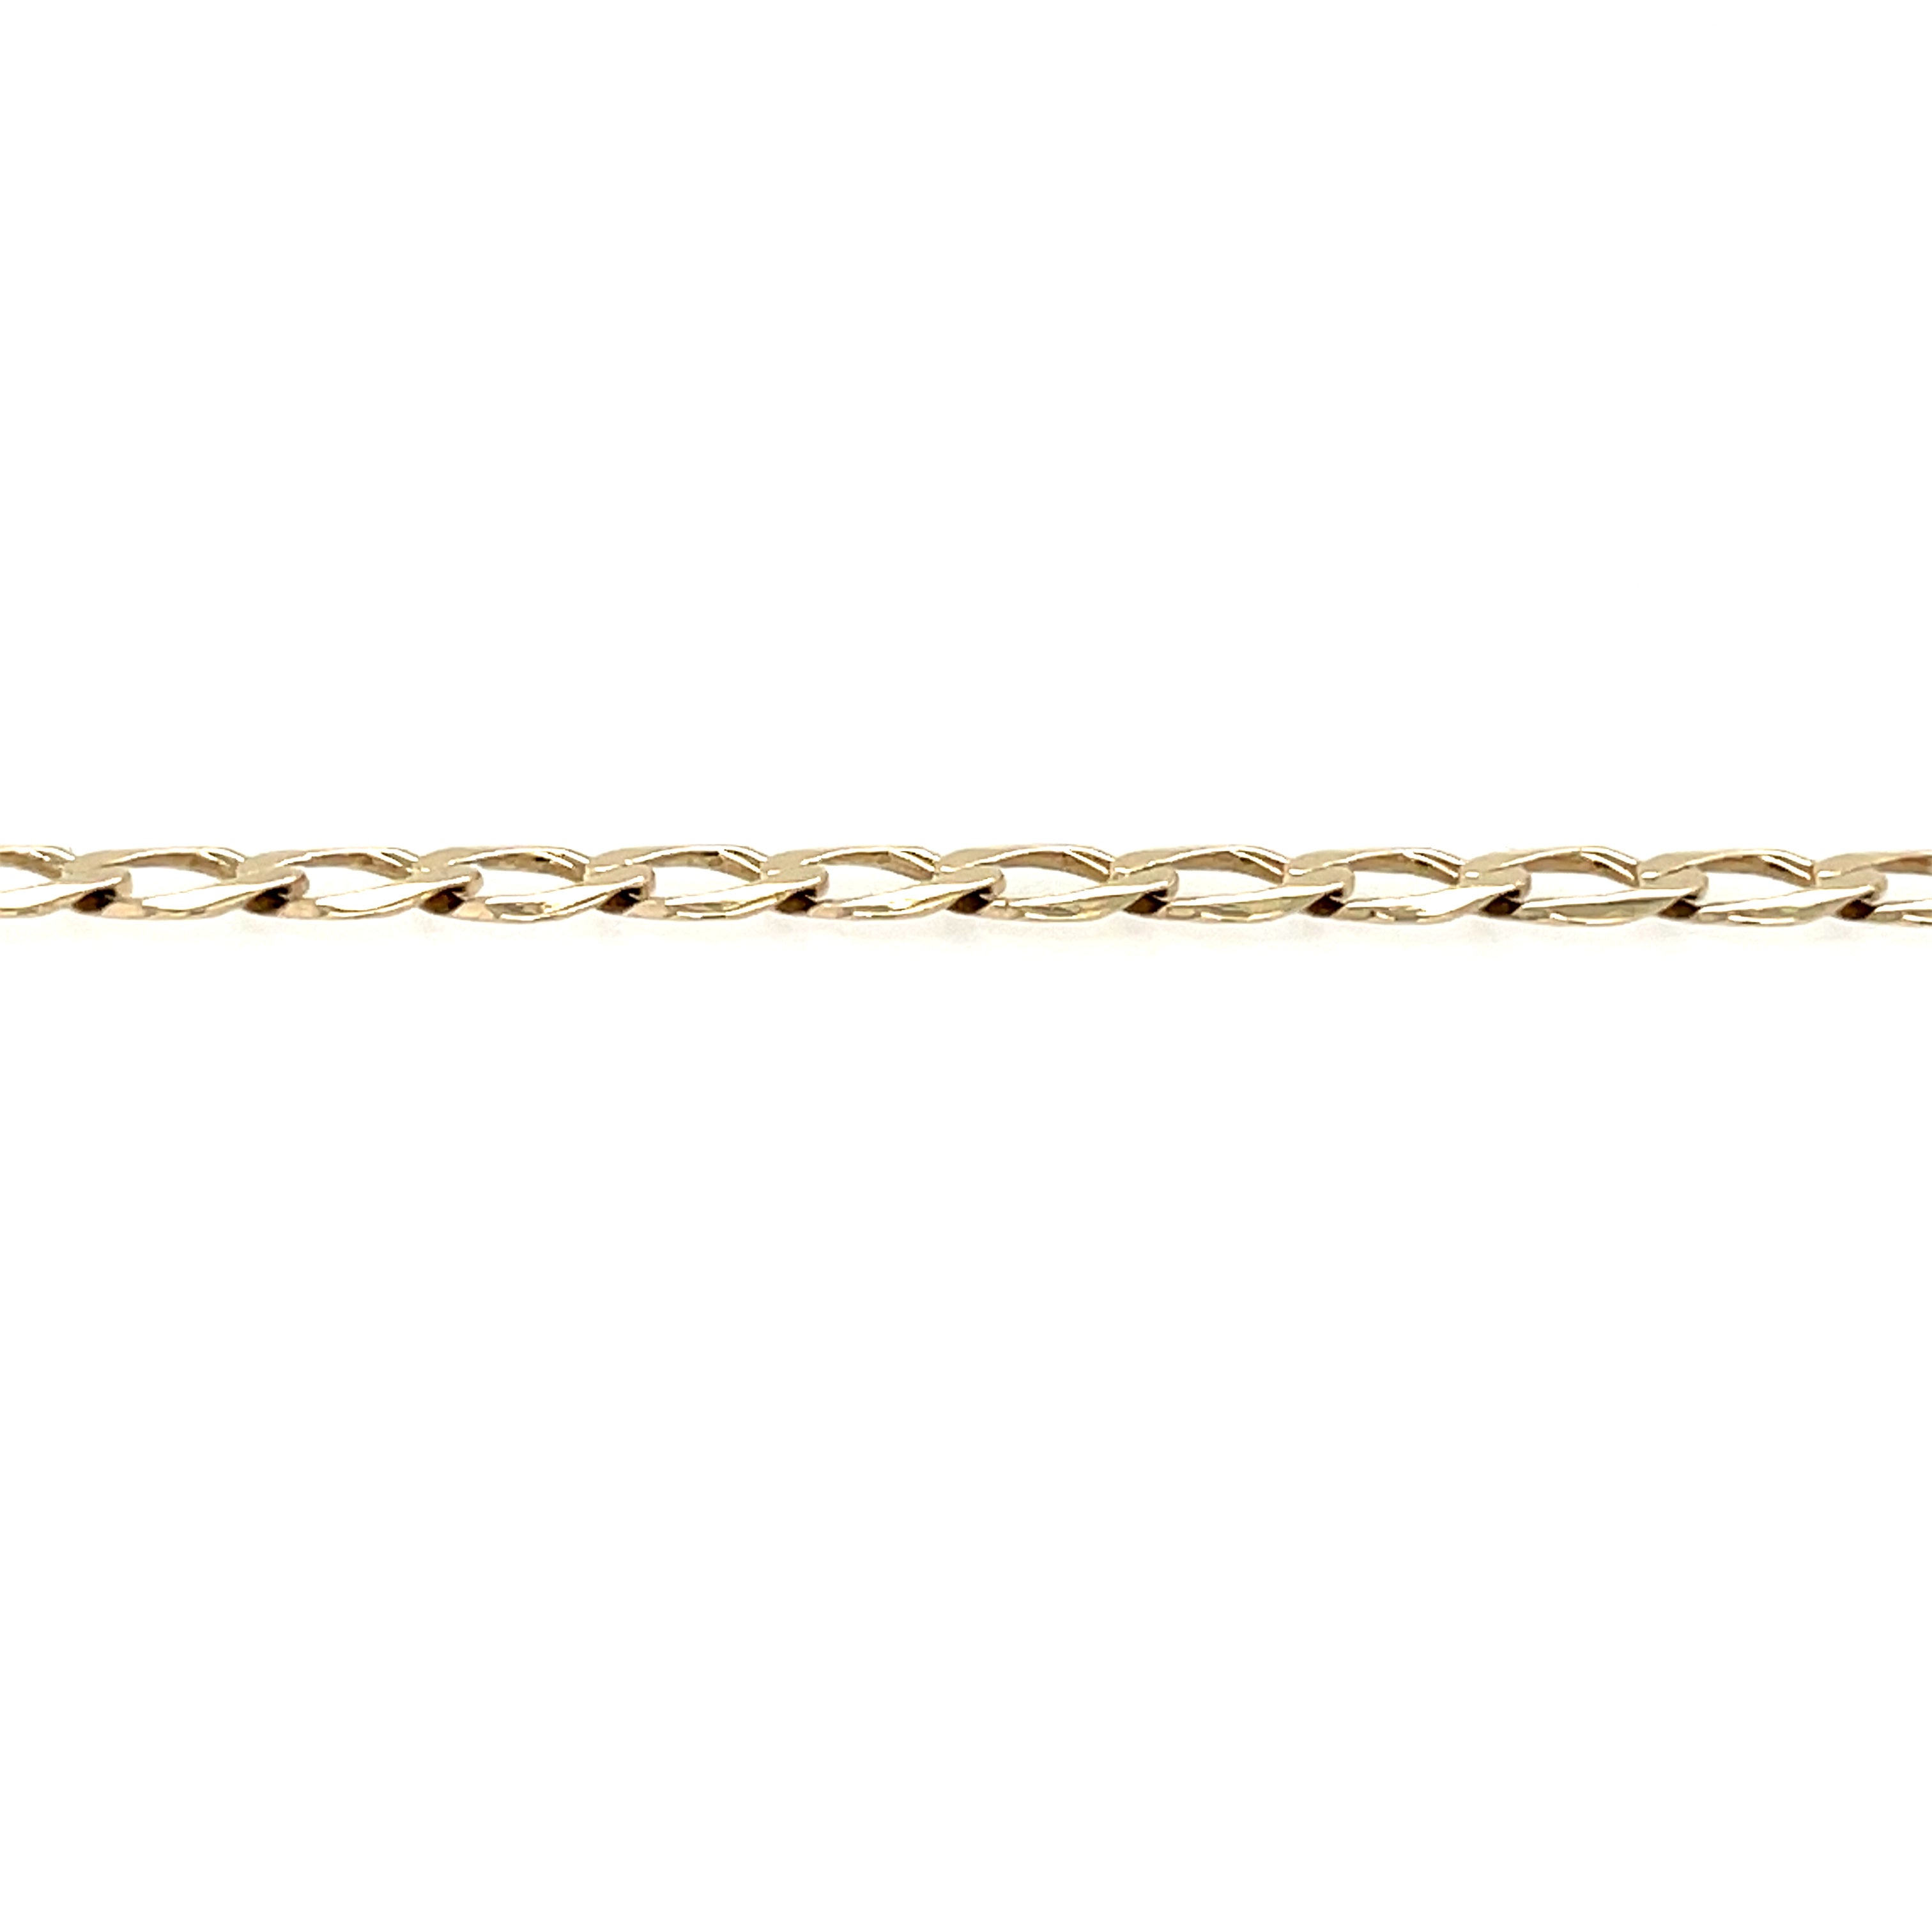 9ct Yellow Gold 8.5 Inch Curb Link Bracelet - 3.40g